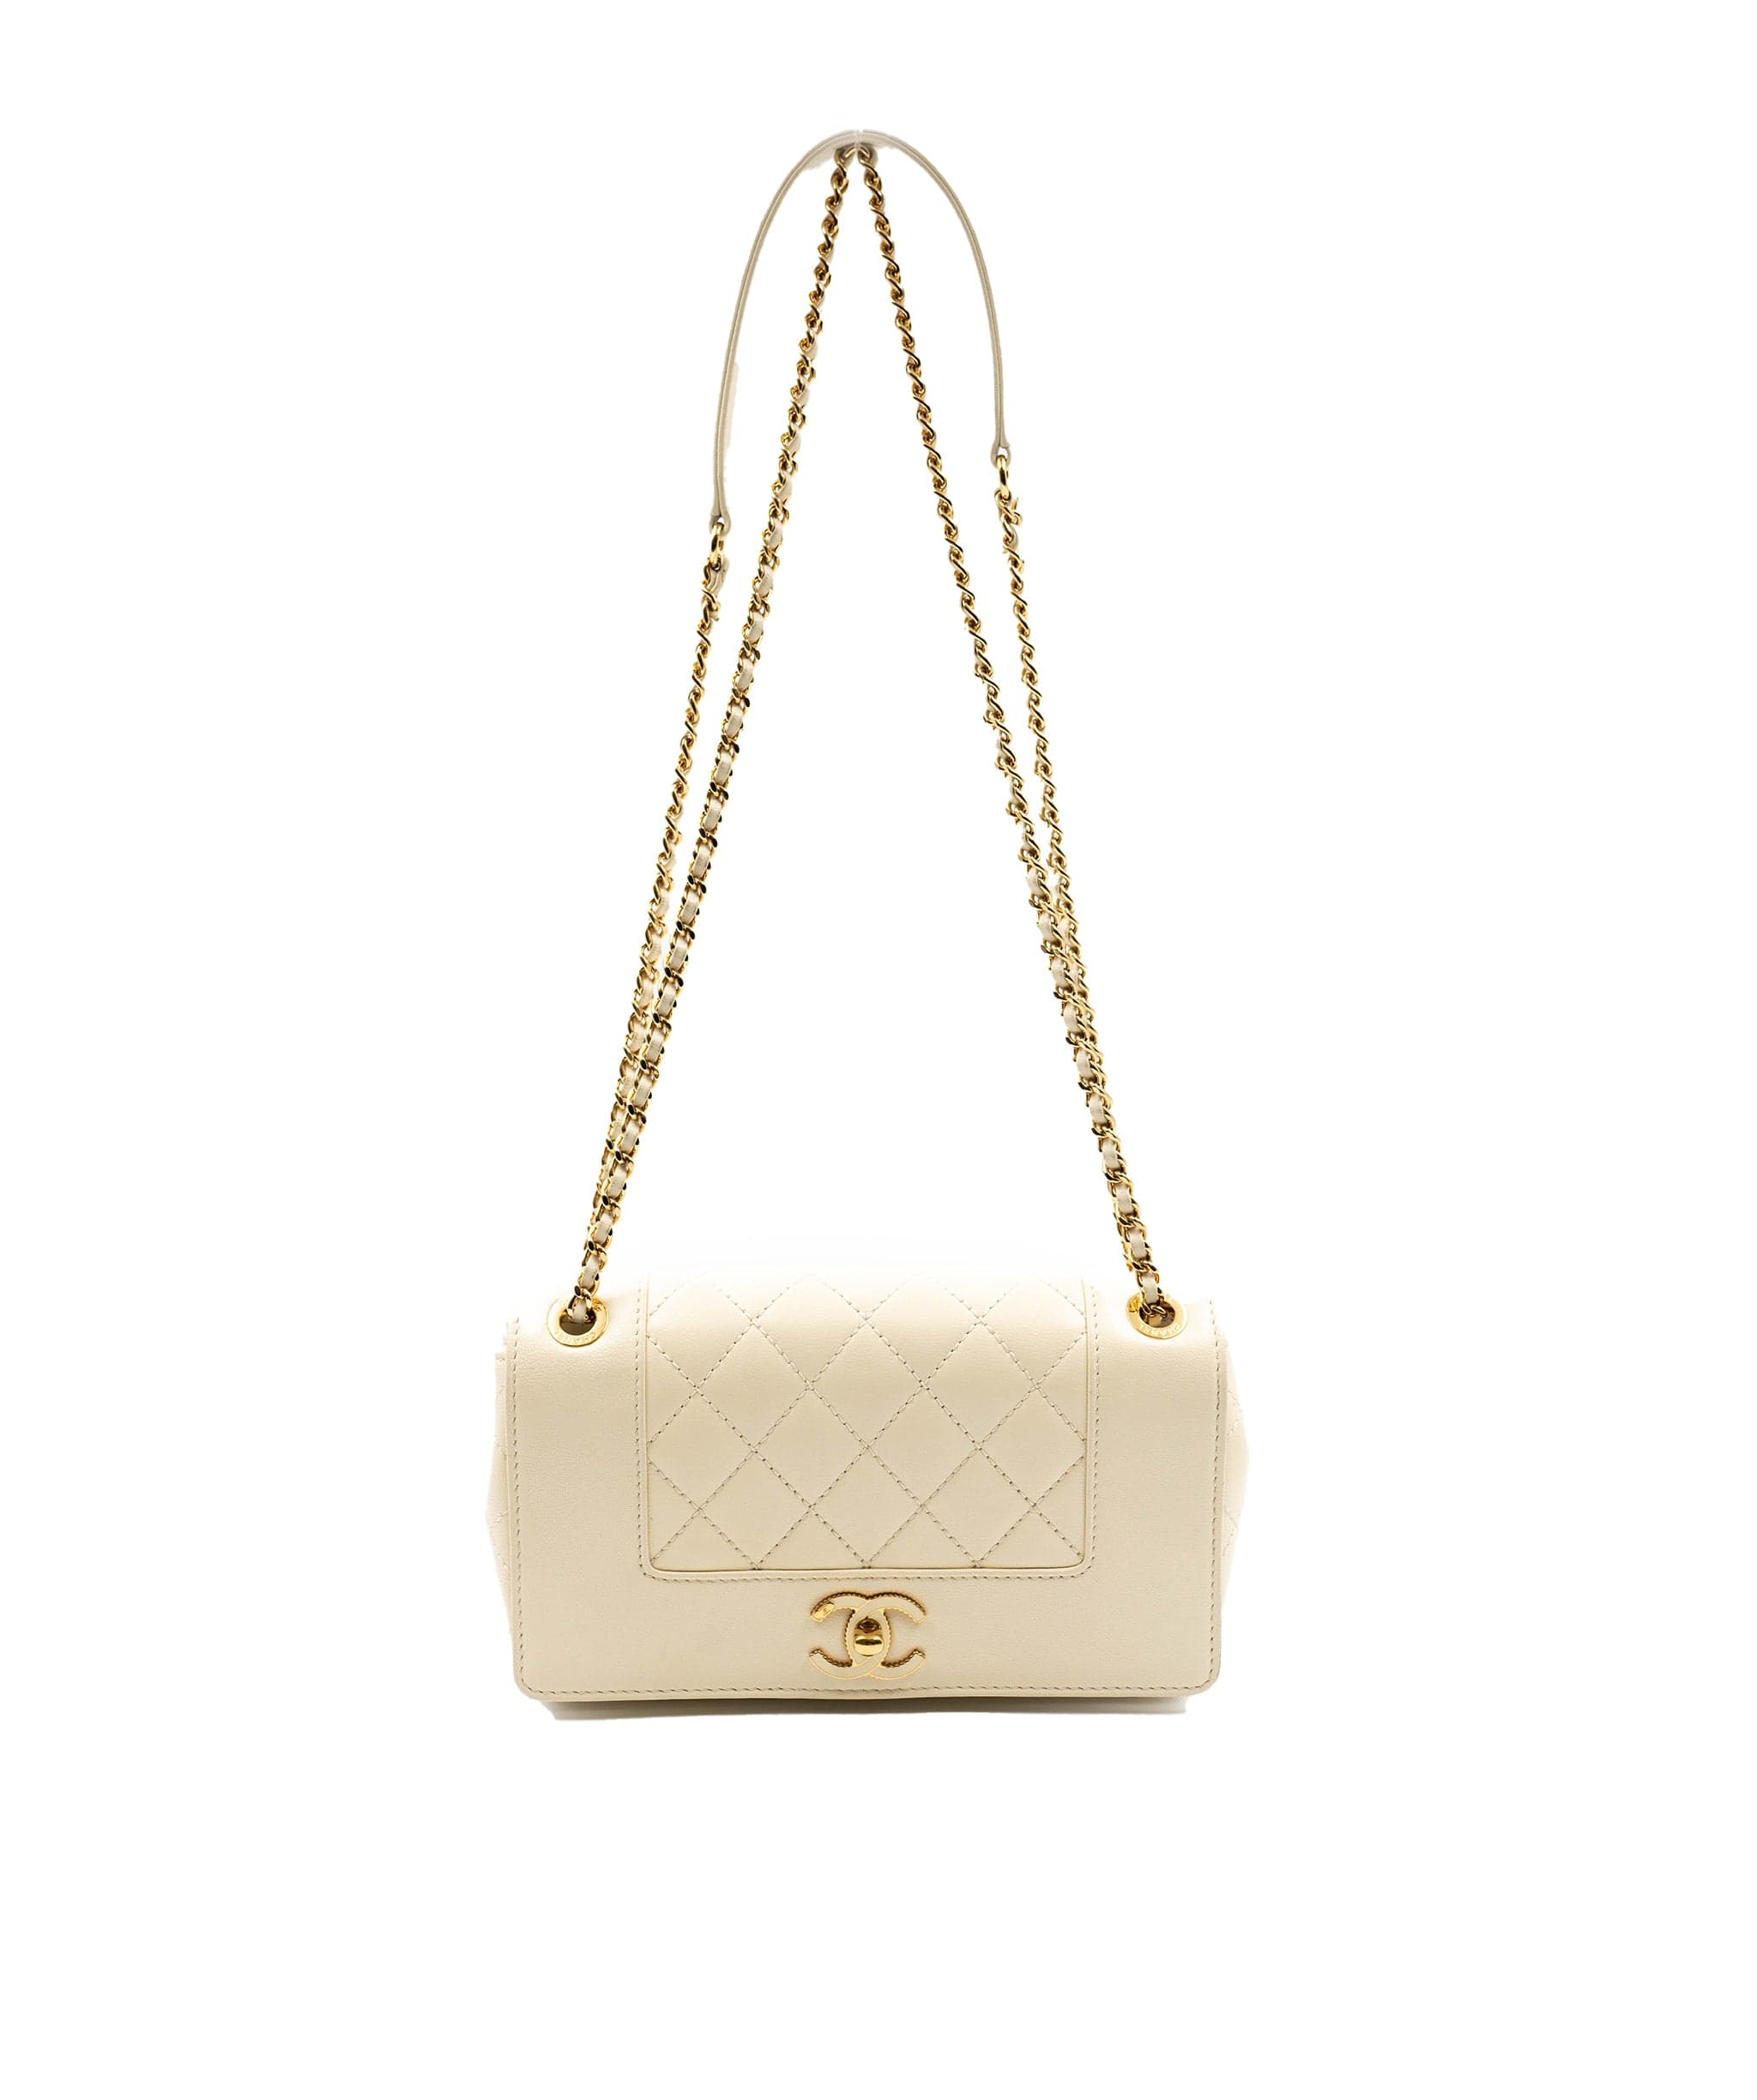 Diana leather crossbody bag Chanel Beige in Leather - 35004726